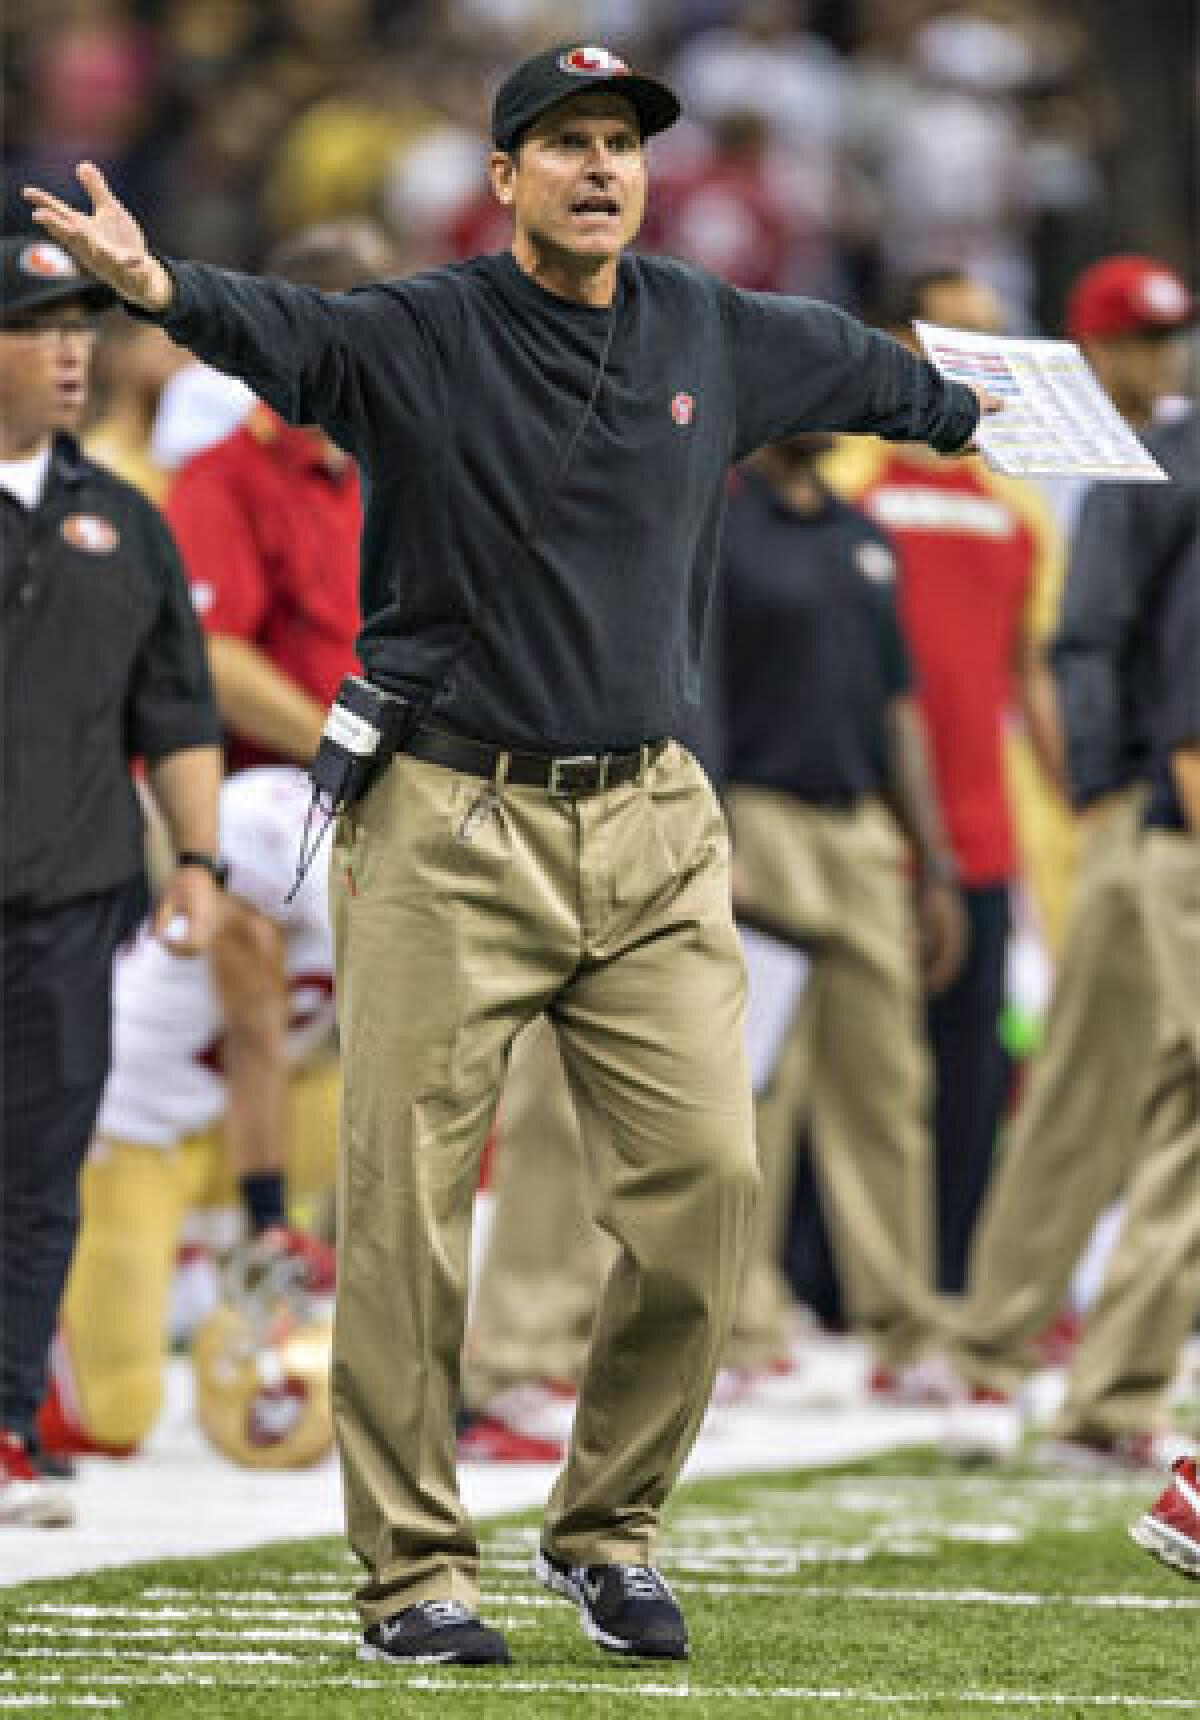 Wife of 49ers Coach Jim Harbaugh slams his $8 pleated pants - Los